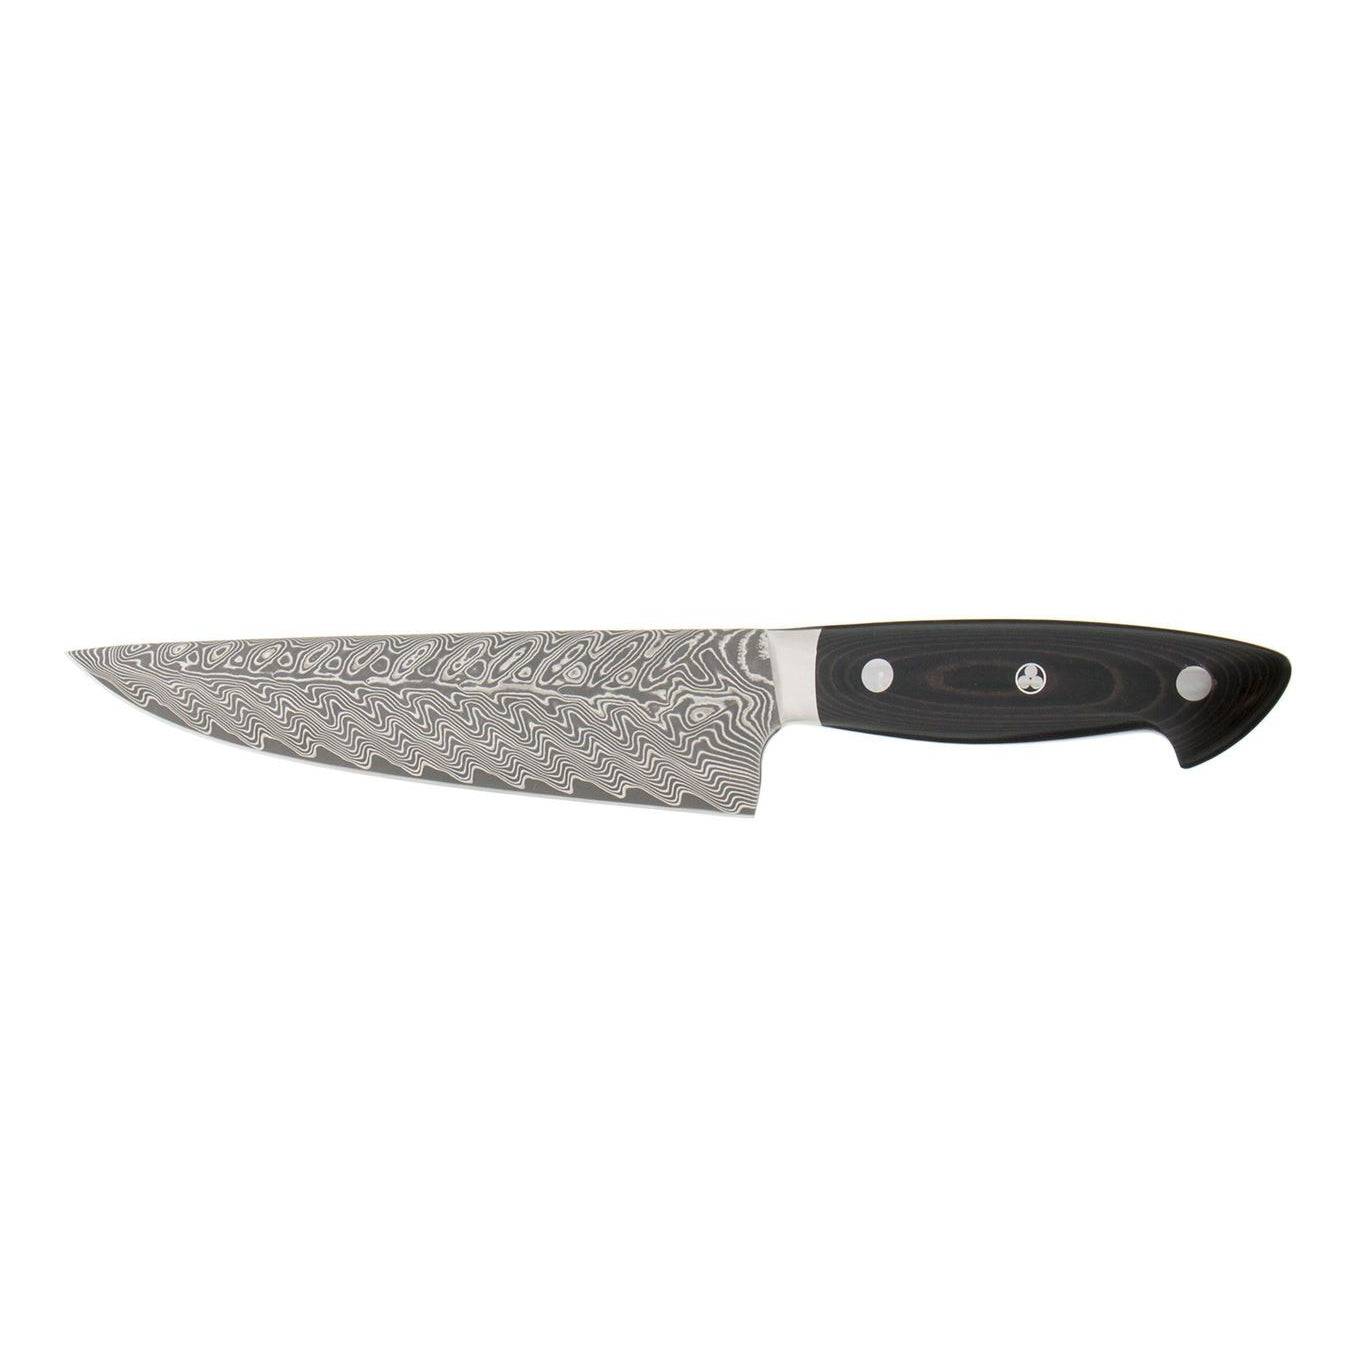 Zwilling Bob Kramer Euroline Damascus Collection SG2 Stainless Steel Narrow Chef's Knife, 8-Inches - Kitchen Universe